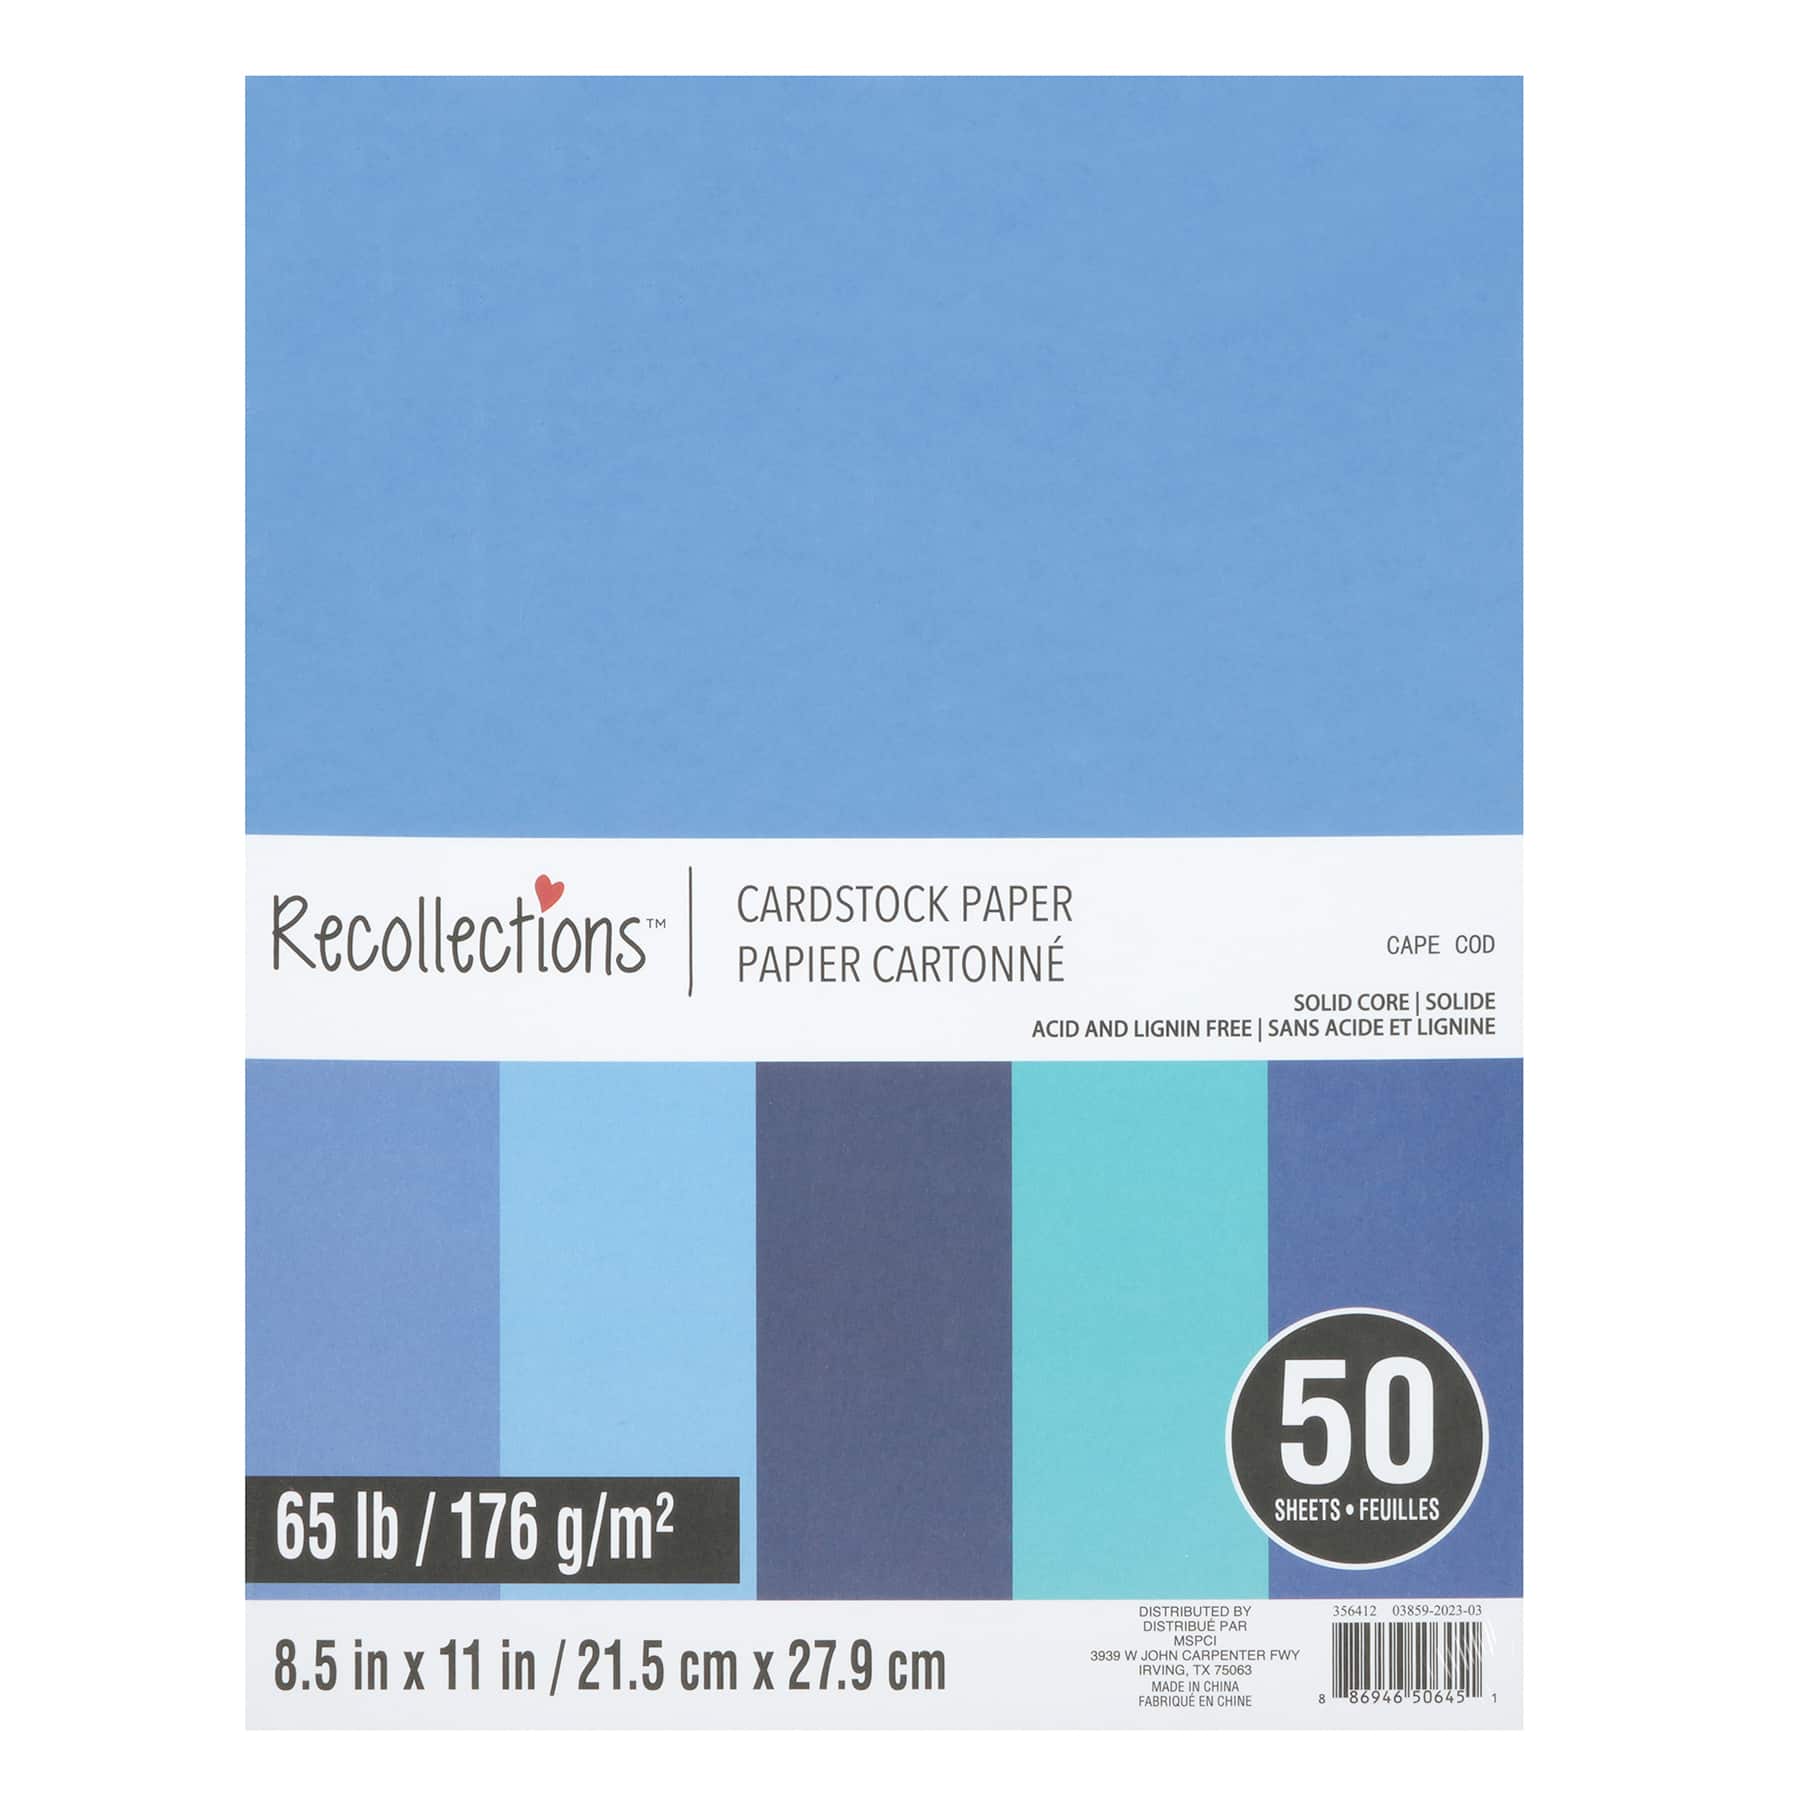 Recollections 12 Pack: Forest Cardstock Paper Pad, 8.5 x 11